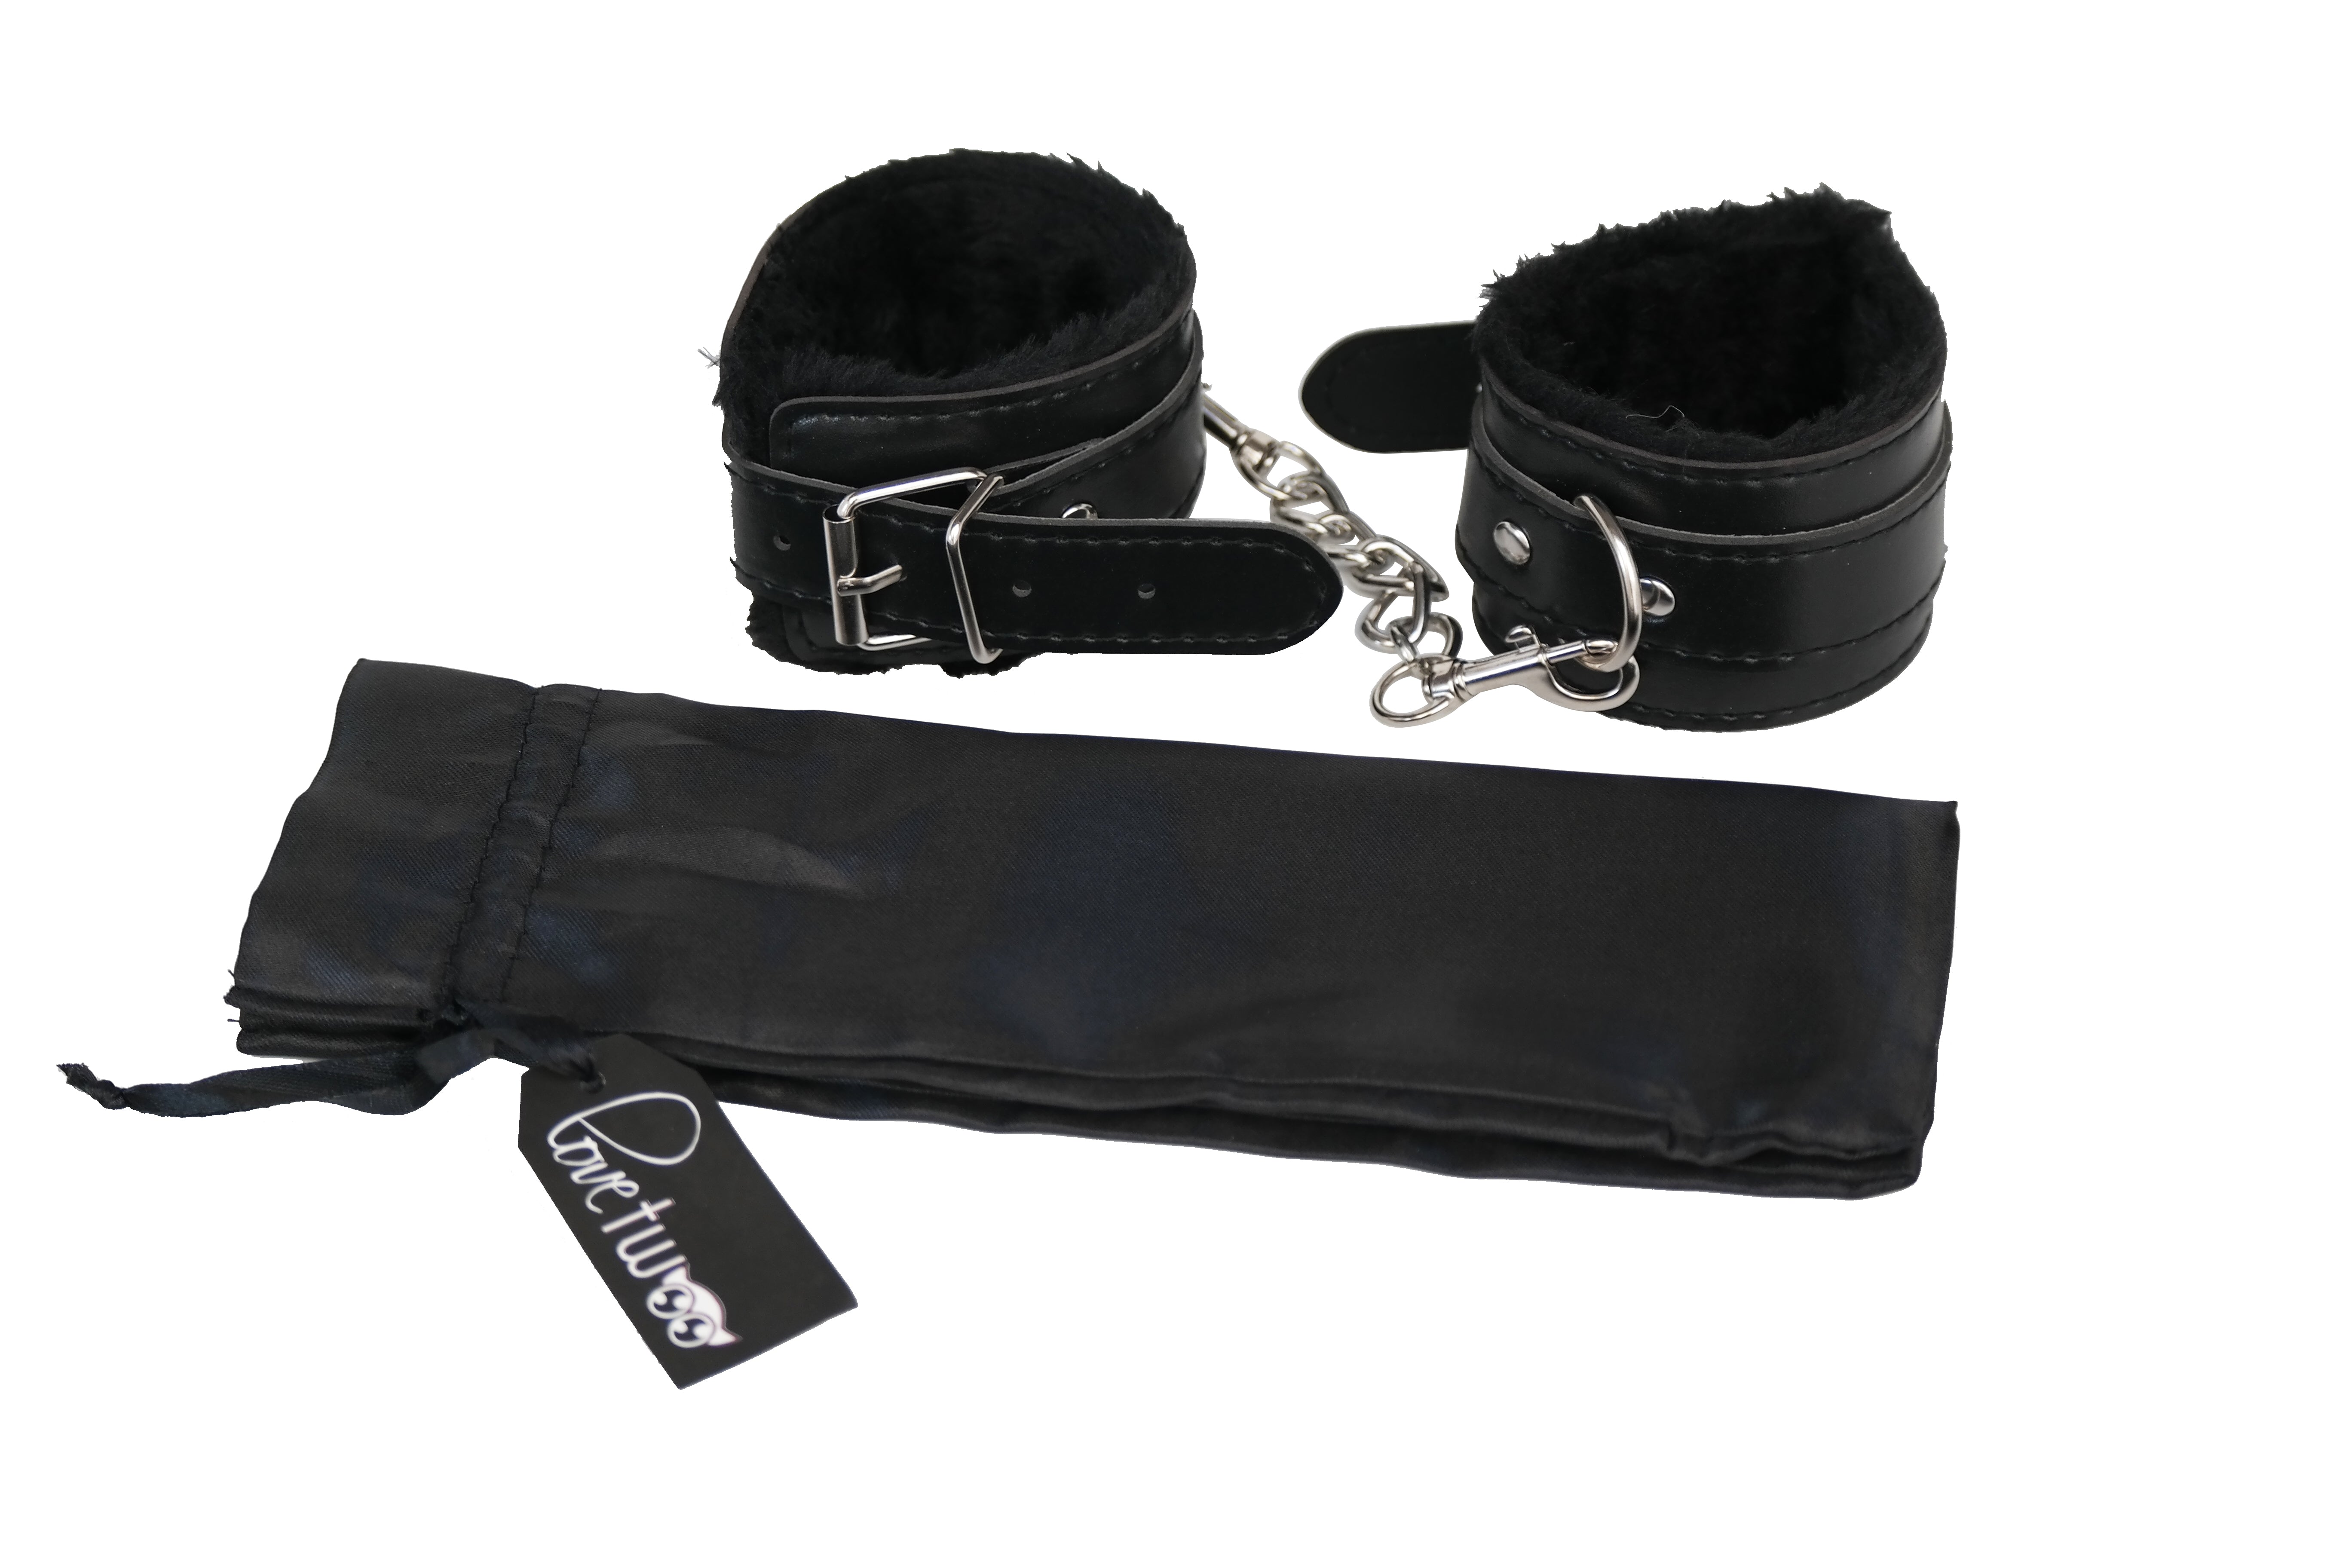 Lovetwoo Leather Fur Lined Handcuffs With Chain